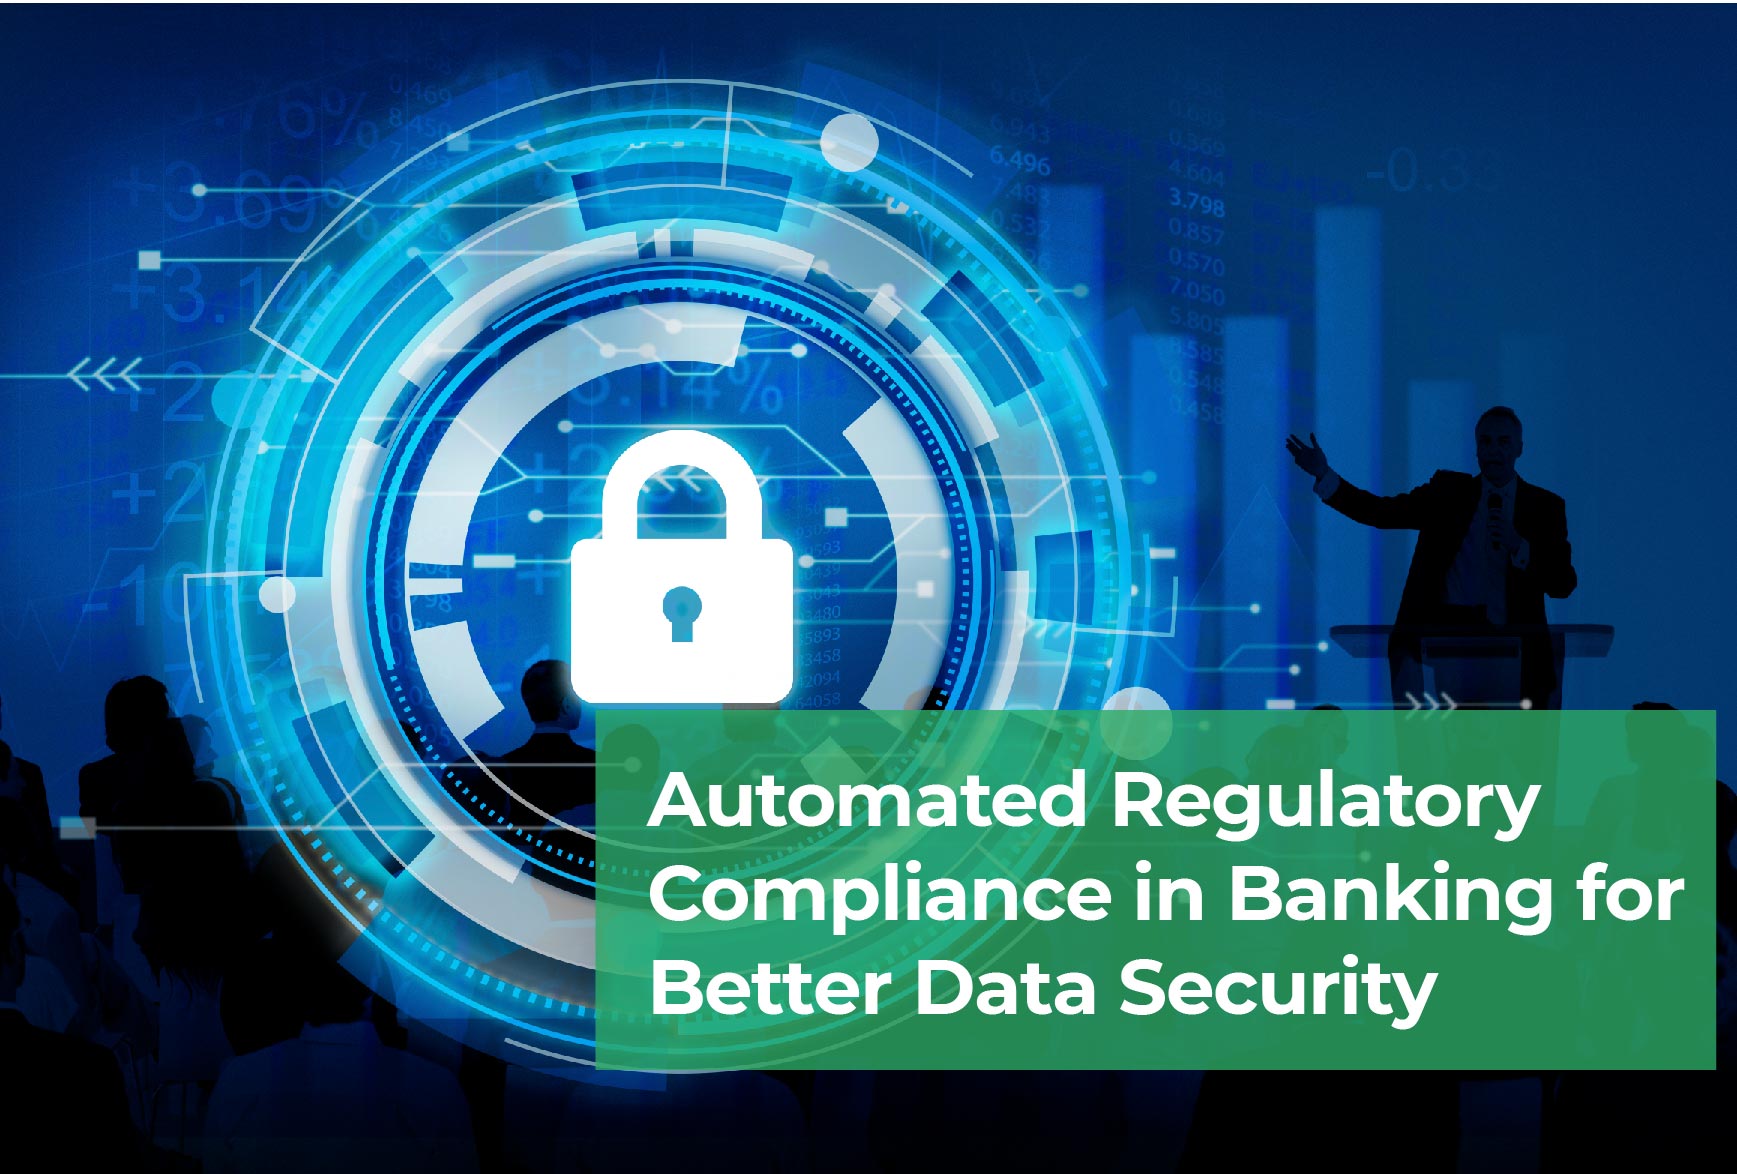 Automated Regulatory Compliance in Banking for Better Data Security